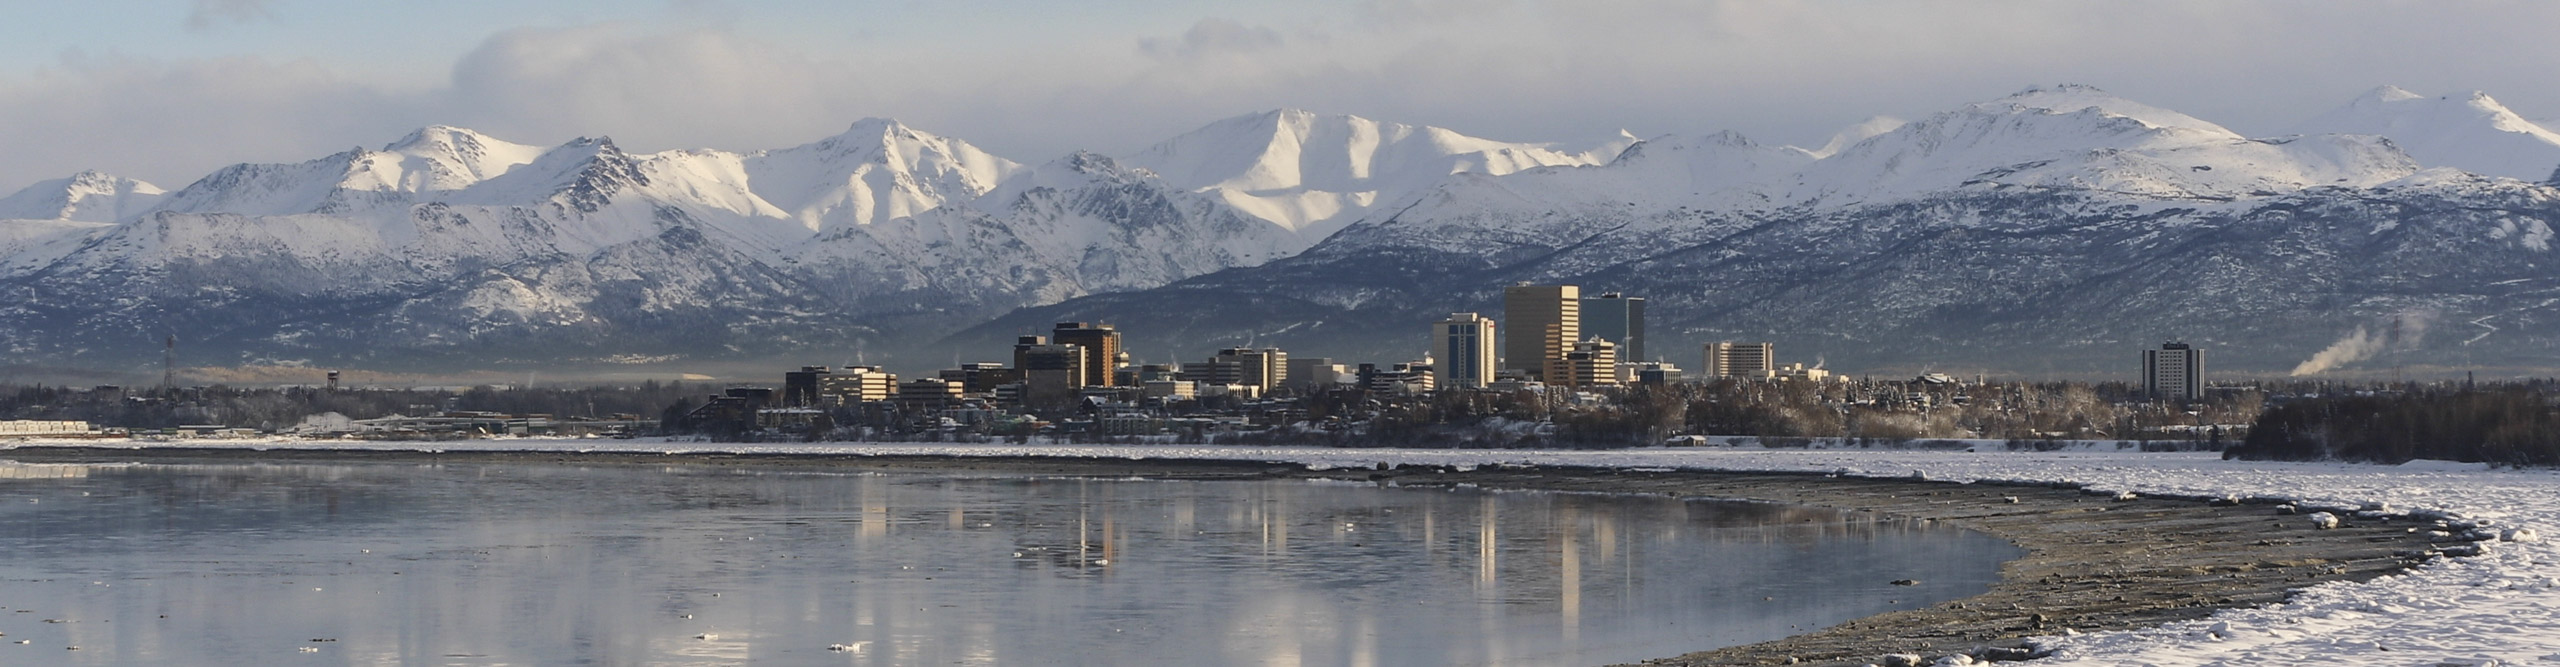  Anchorage skyline with mountains behind it covers in snow, Alaska, USA